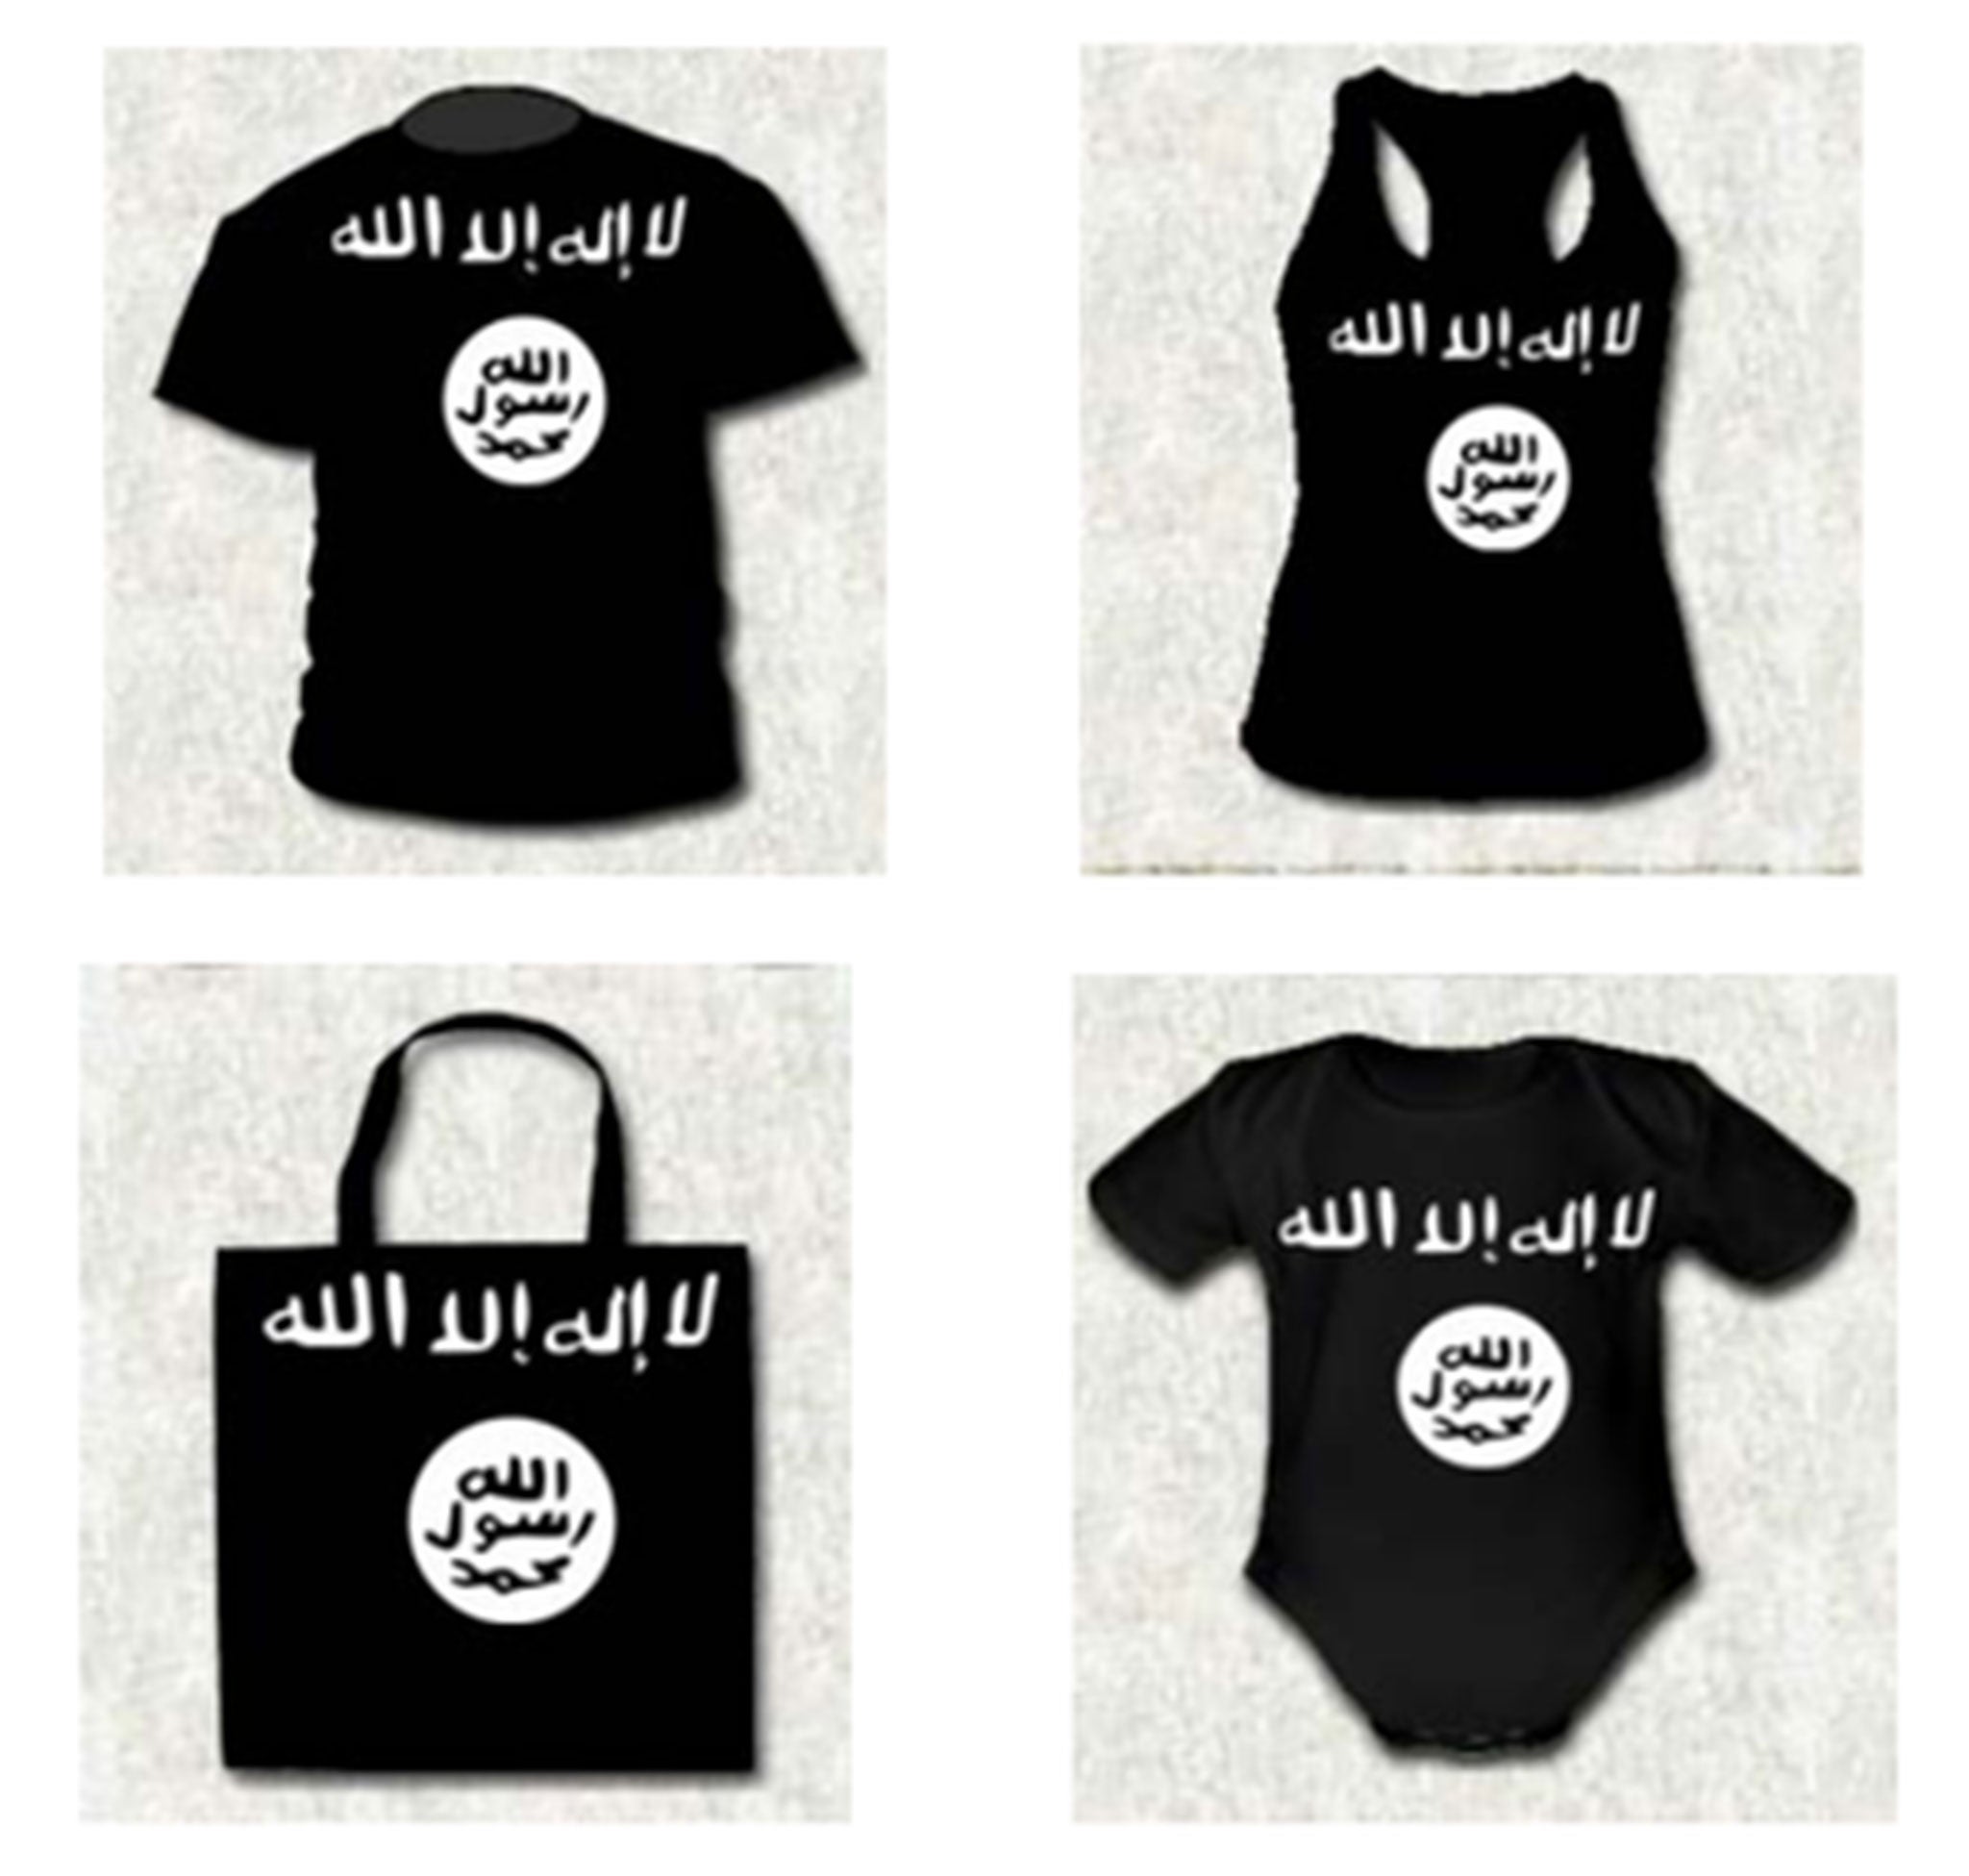 Designs for an Isis clothing range which a man in Spain is accused of selling